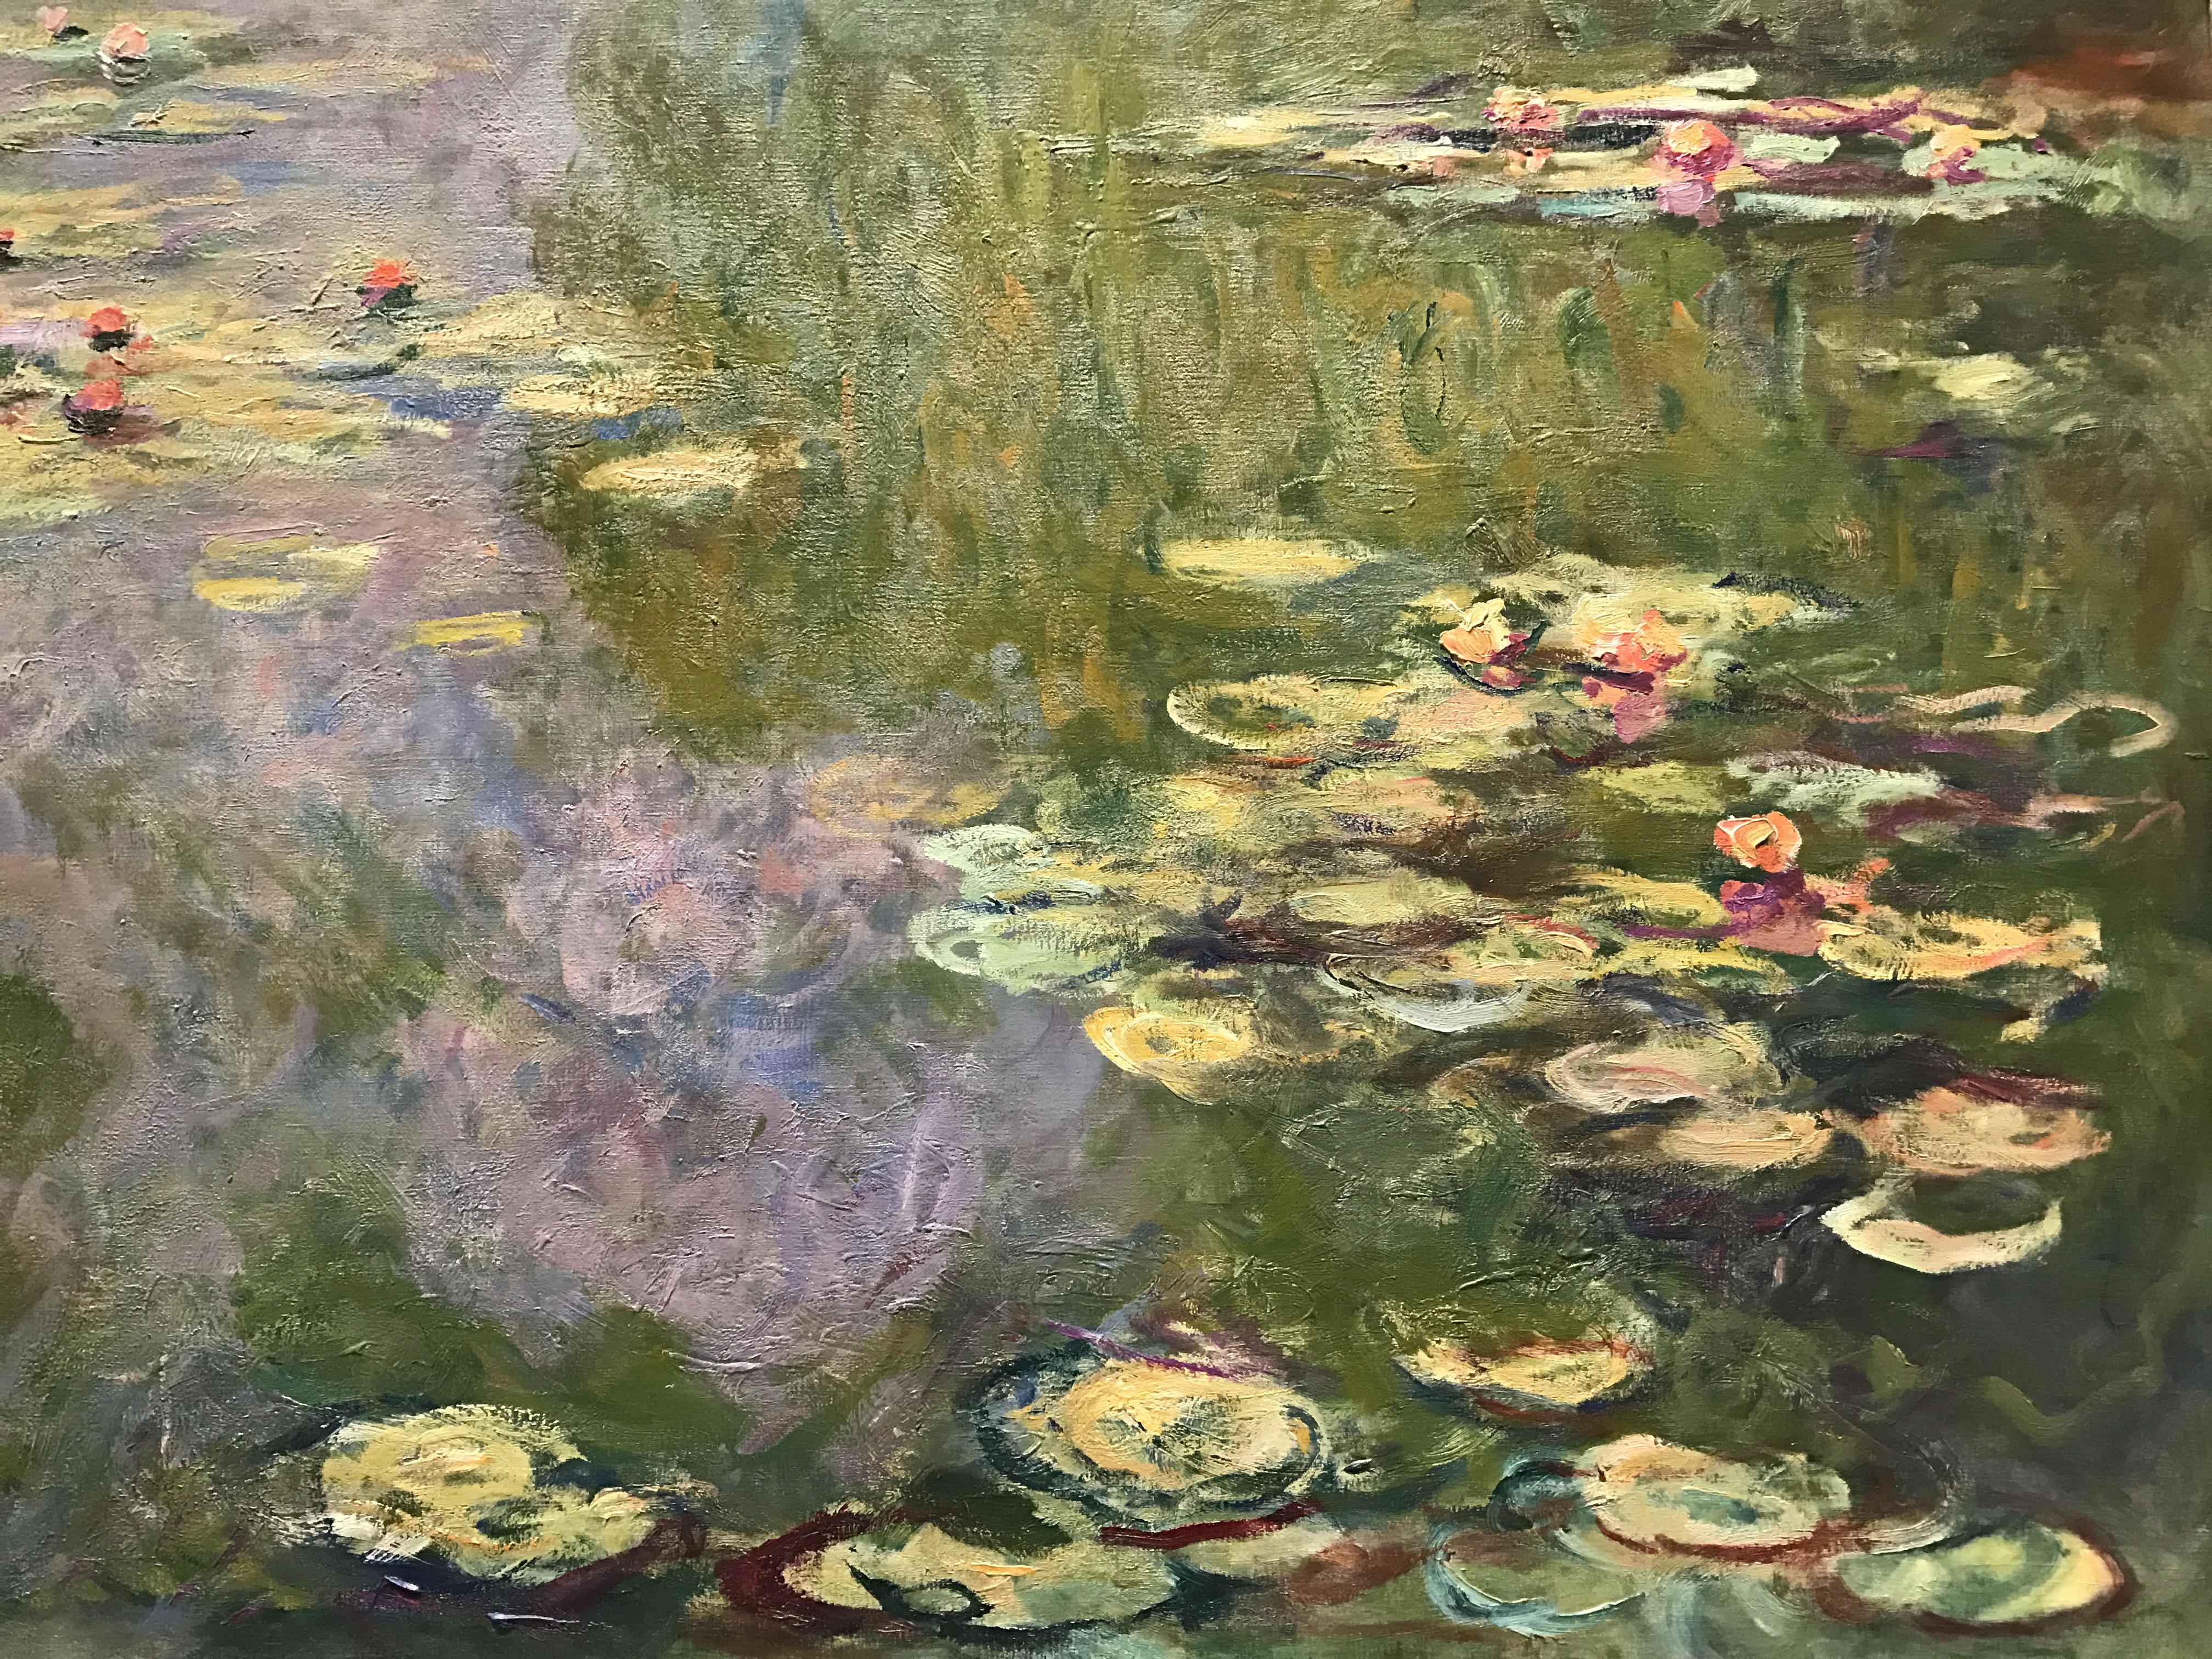 Water Lilies by Claude Monet, 1919, my photo